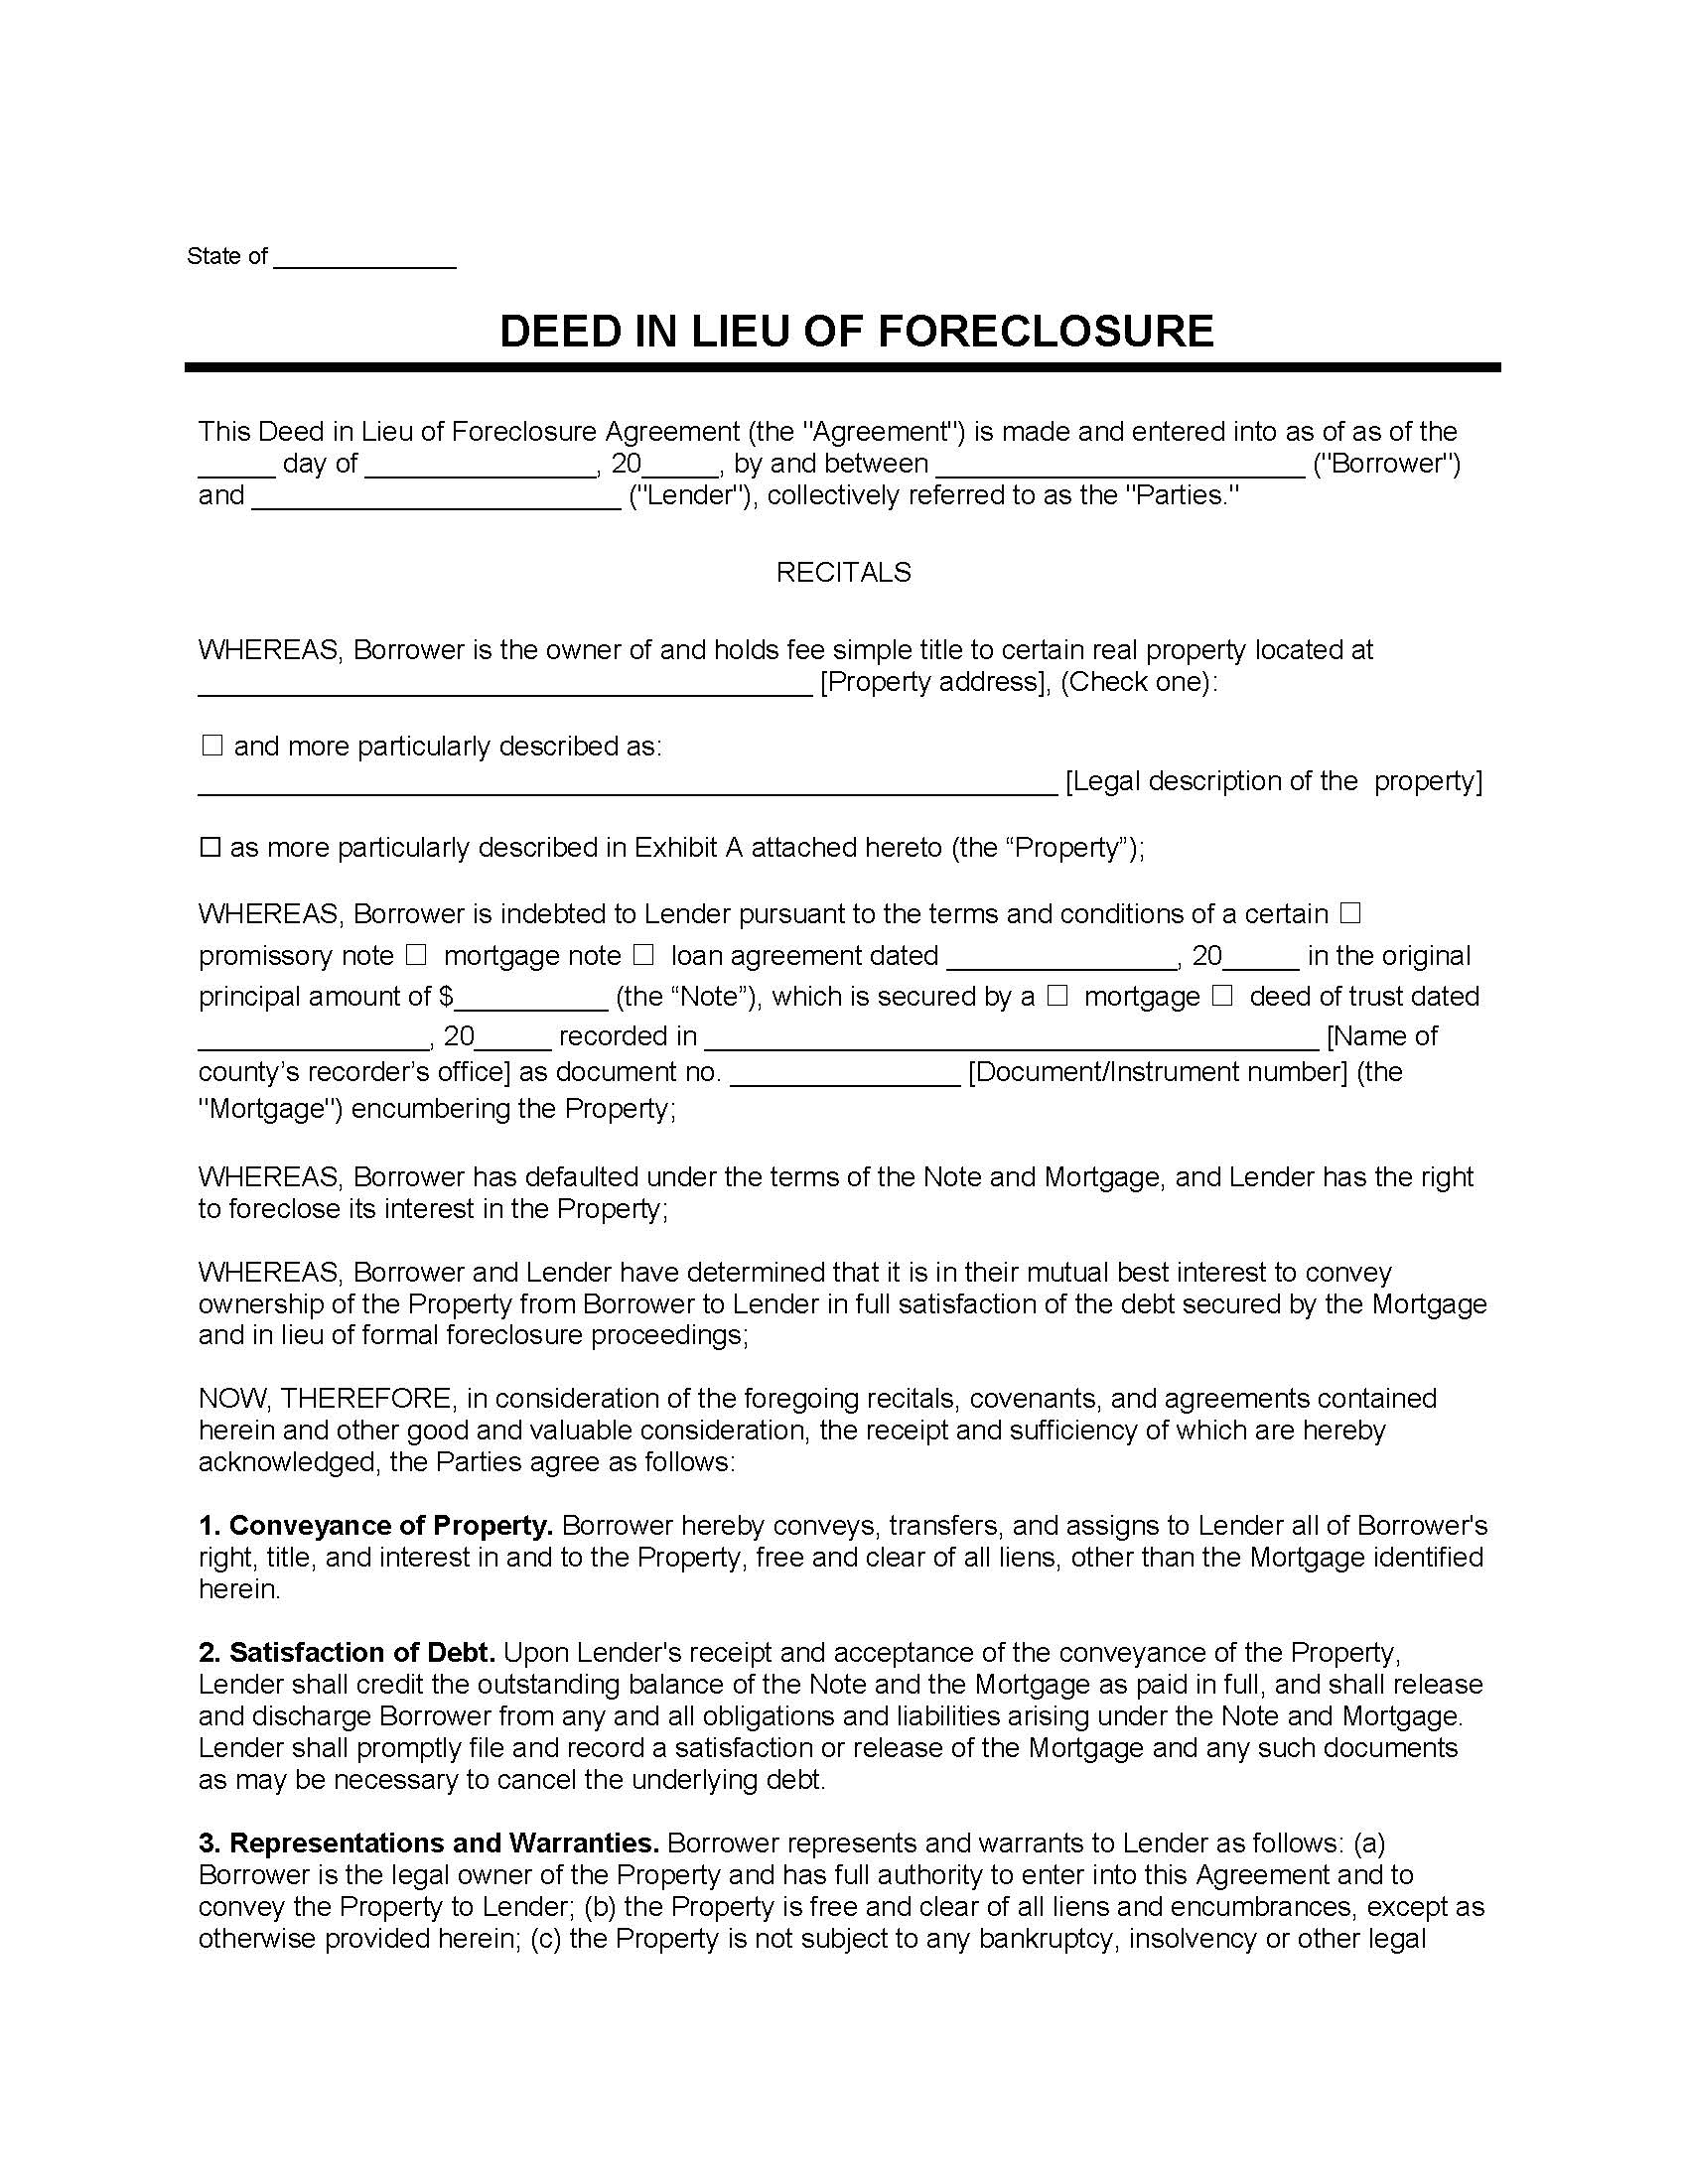 Deed in Lieu of Foreclosure Template